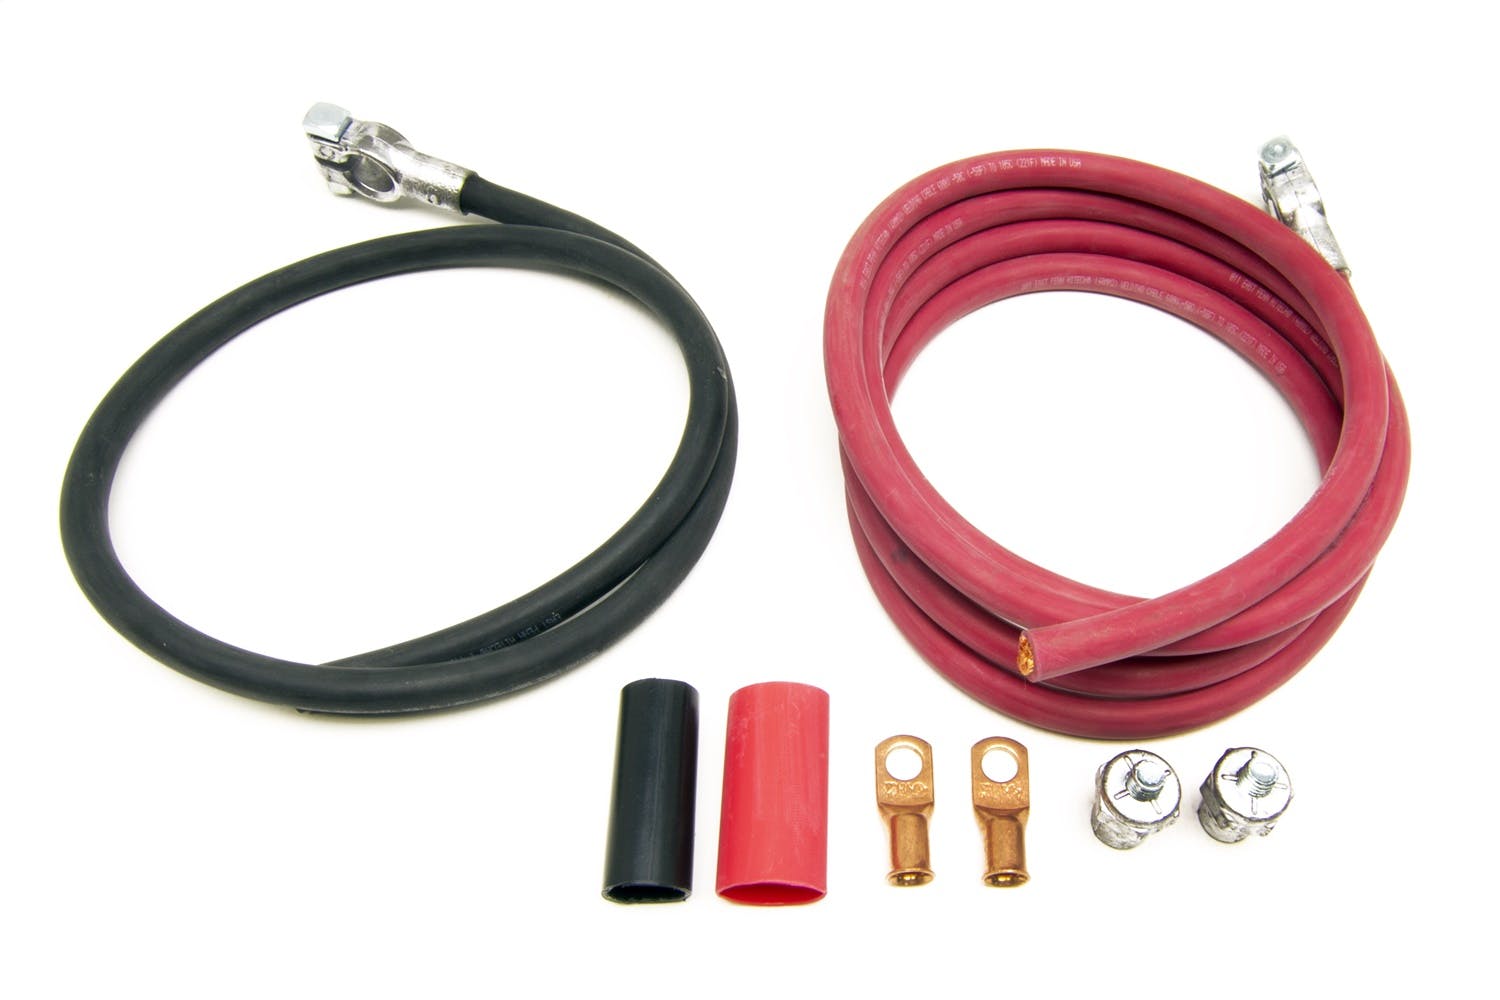 Painless 40113 Battery Cable Kit